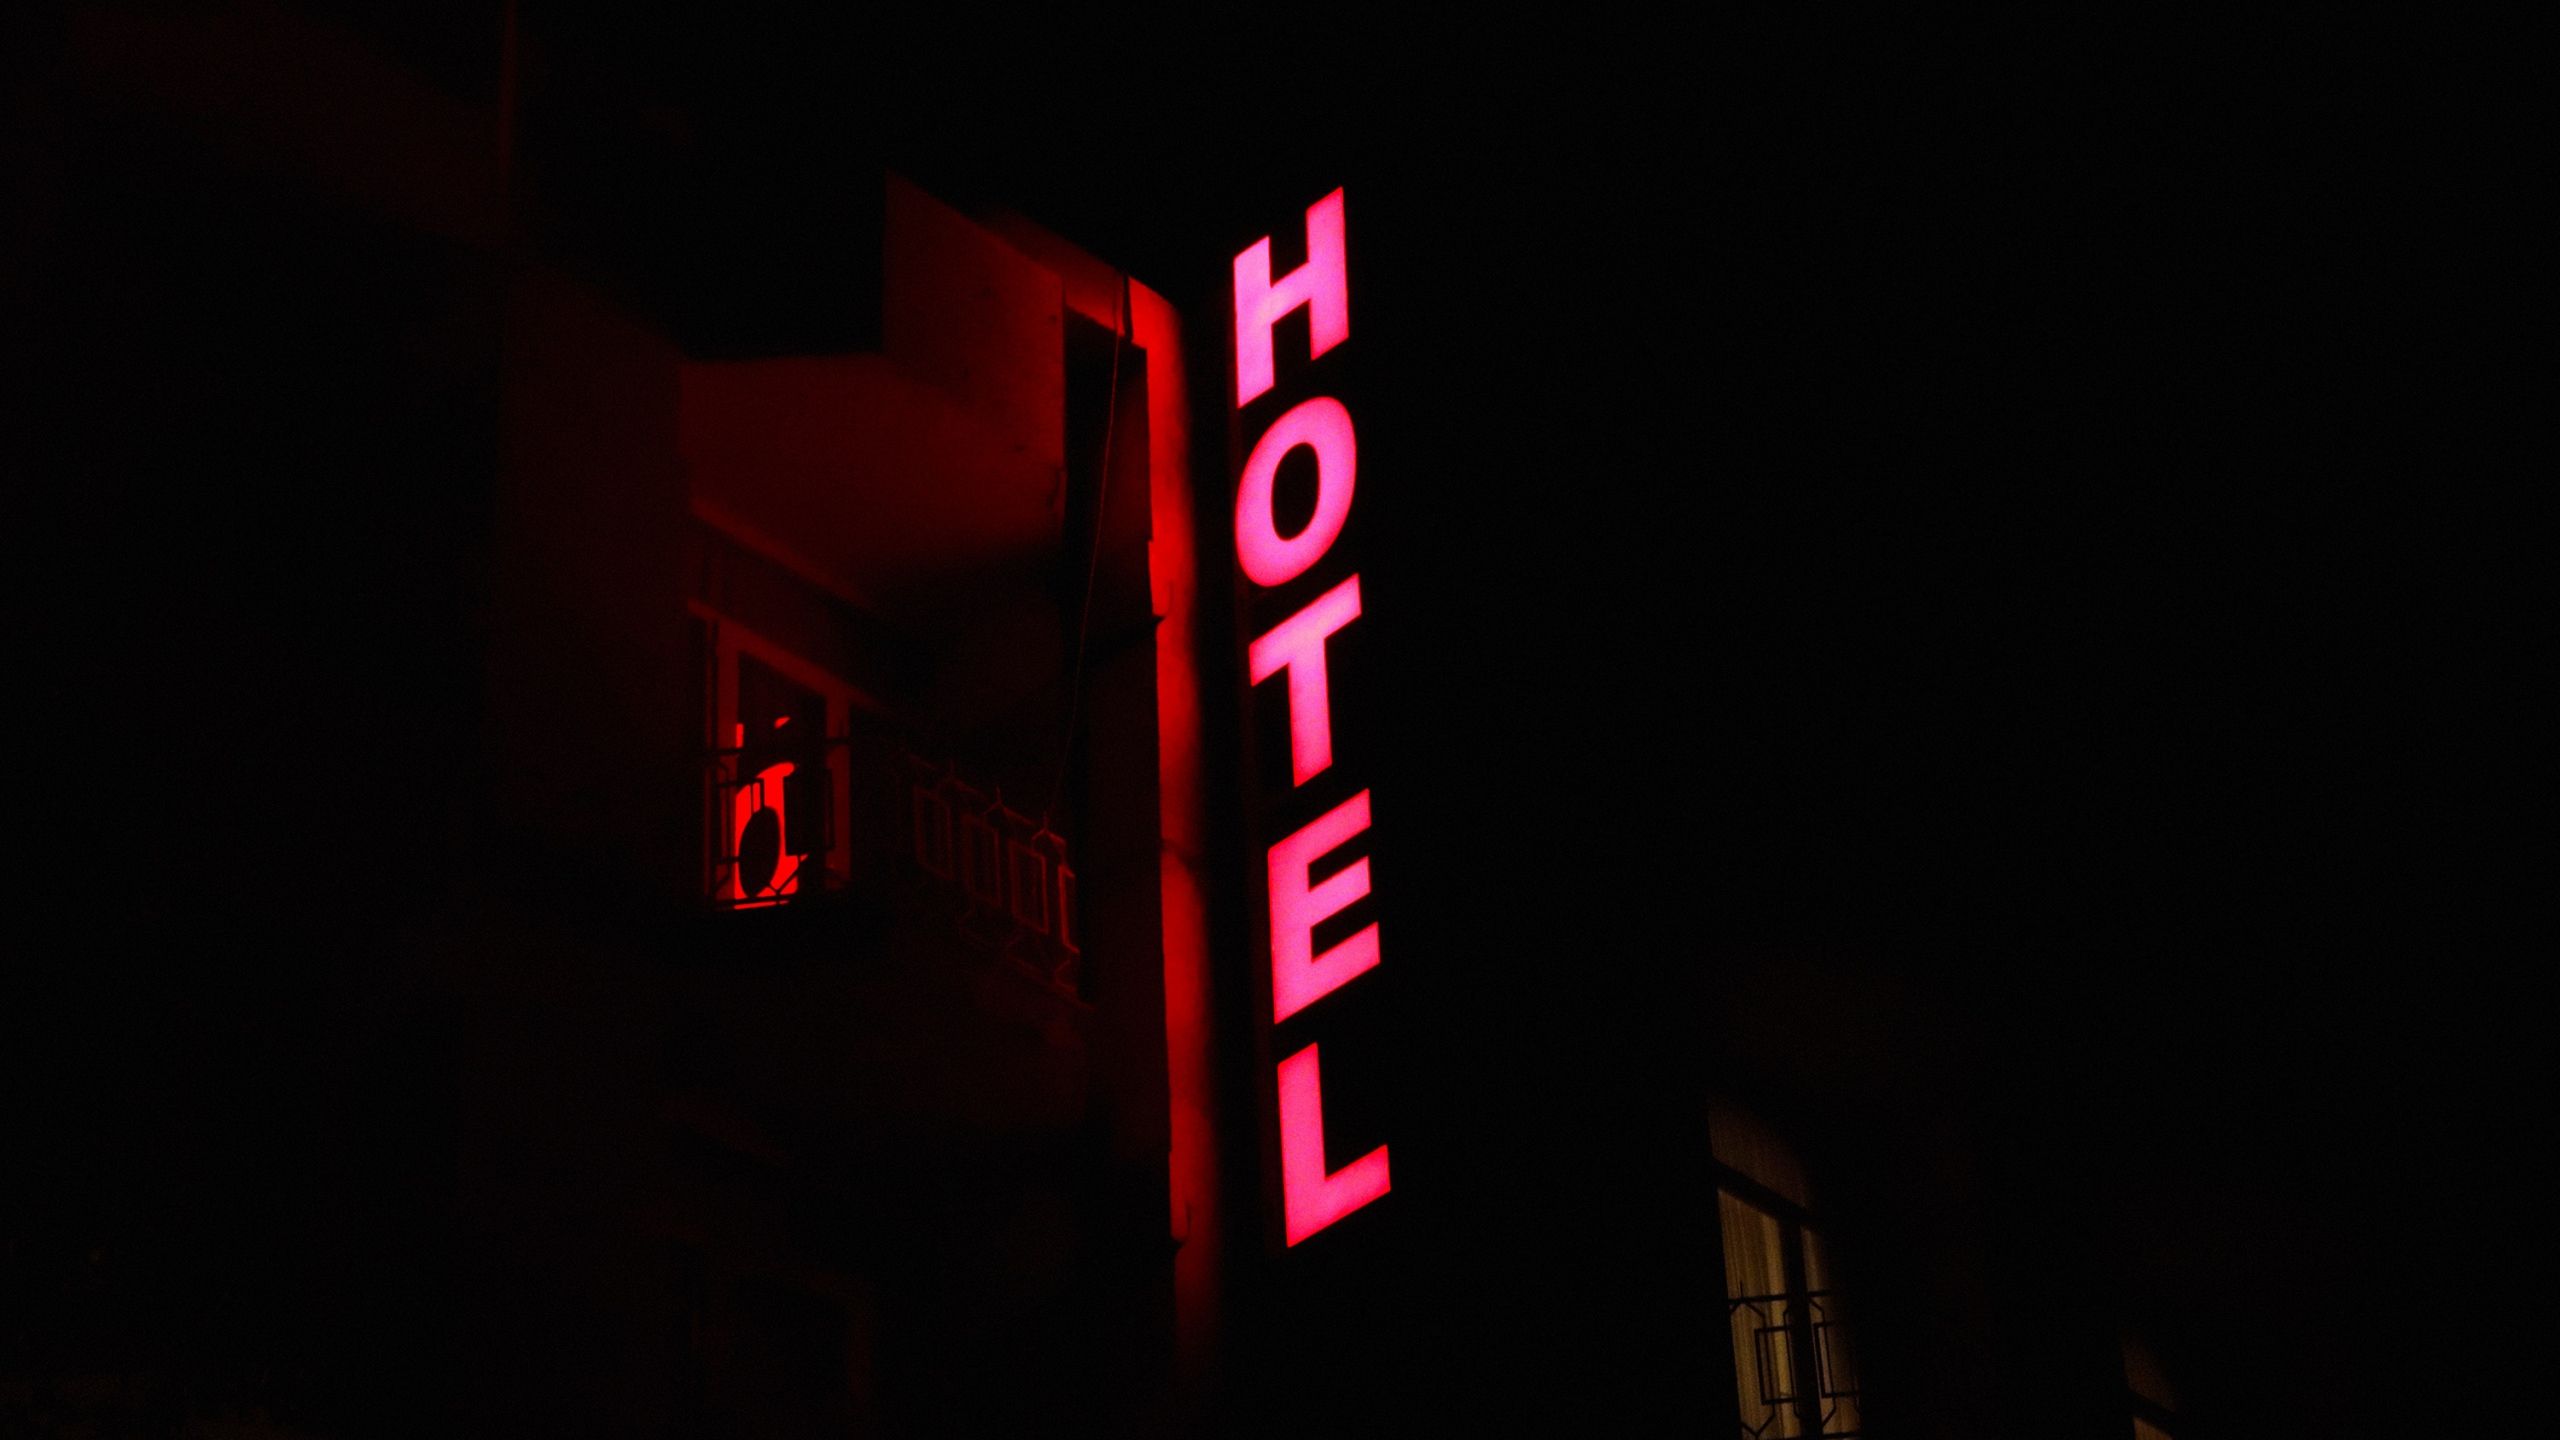 A hotel sign that is lit up at night - YouTube